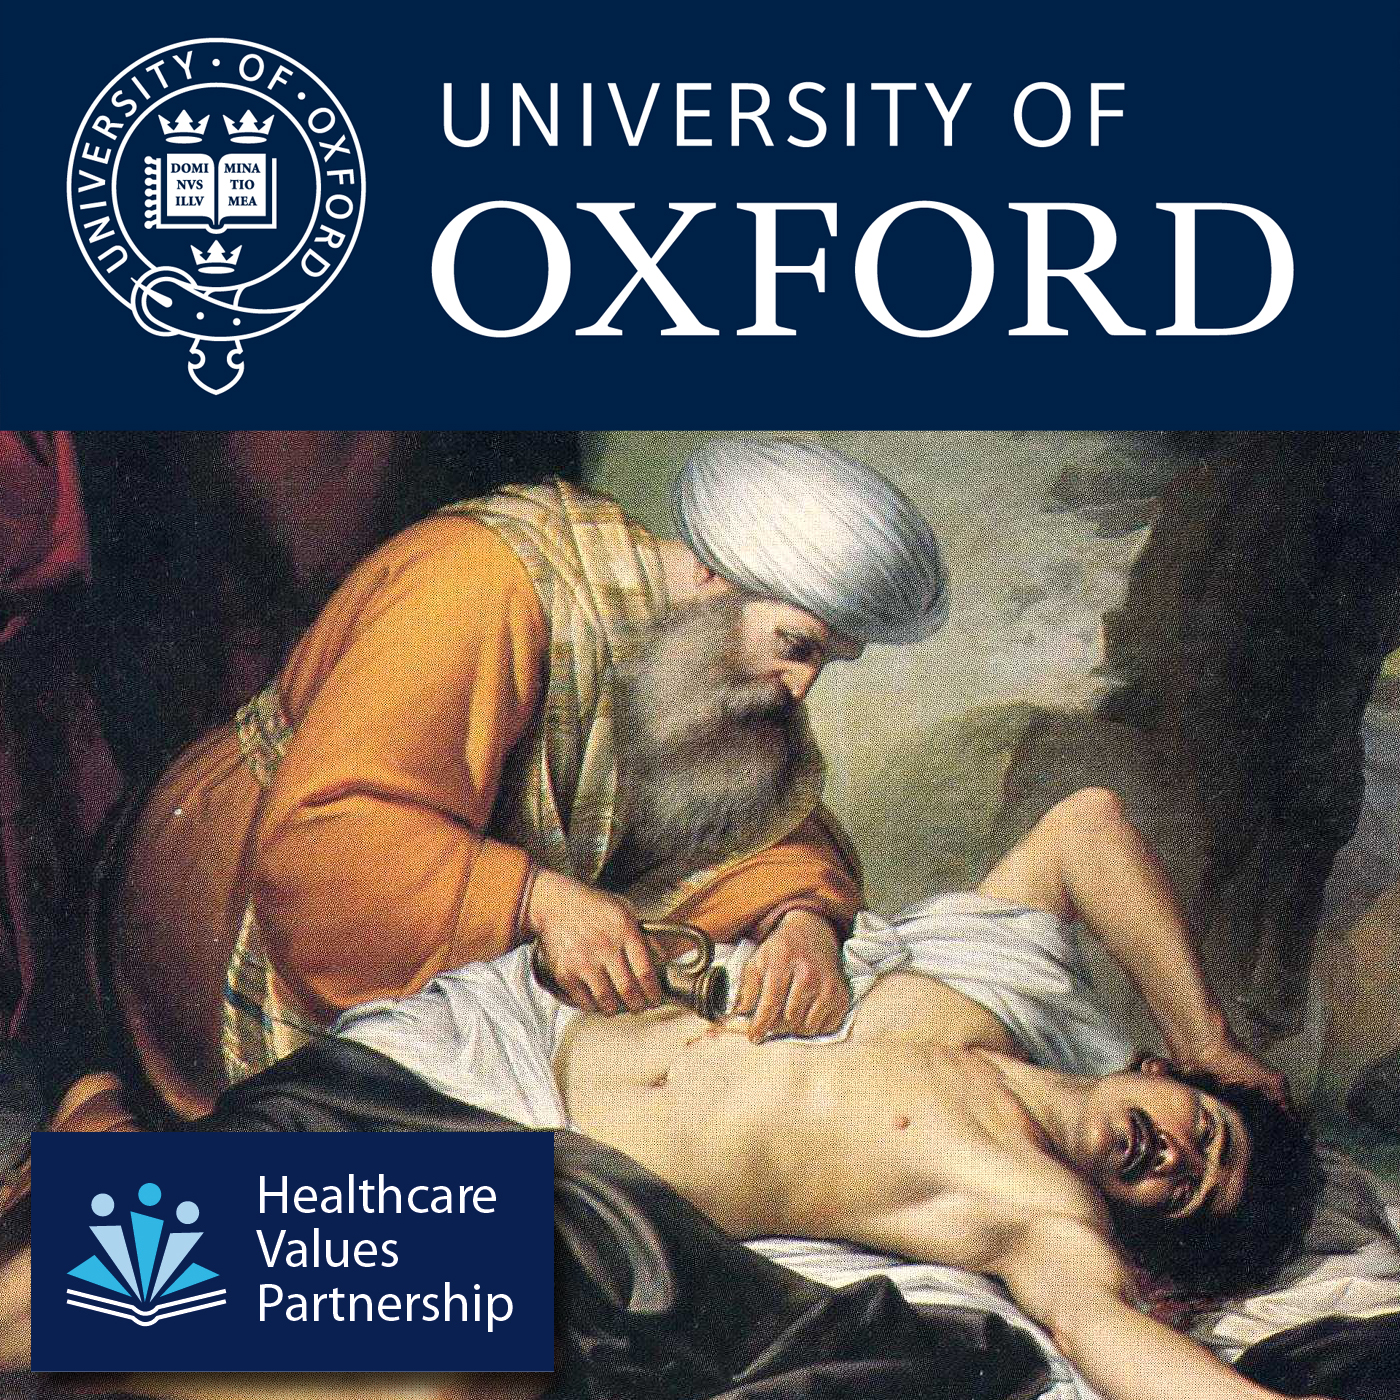 The Oxford Healthcare Values Partnership